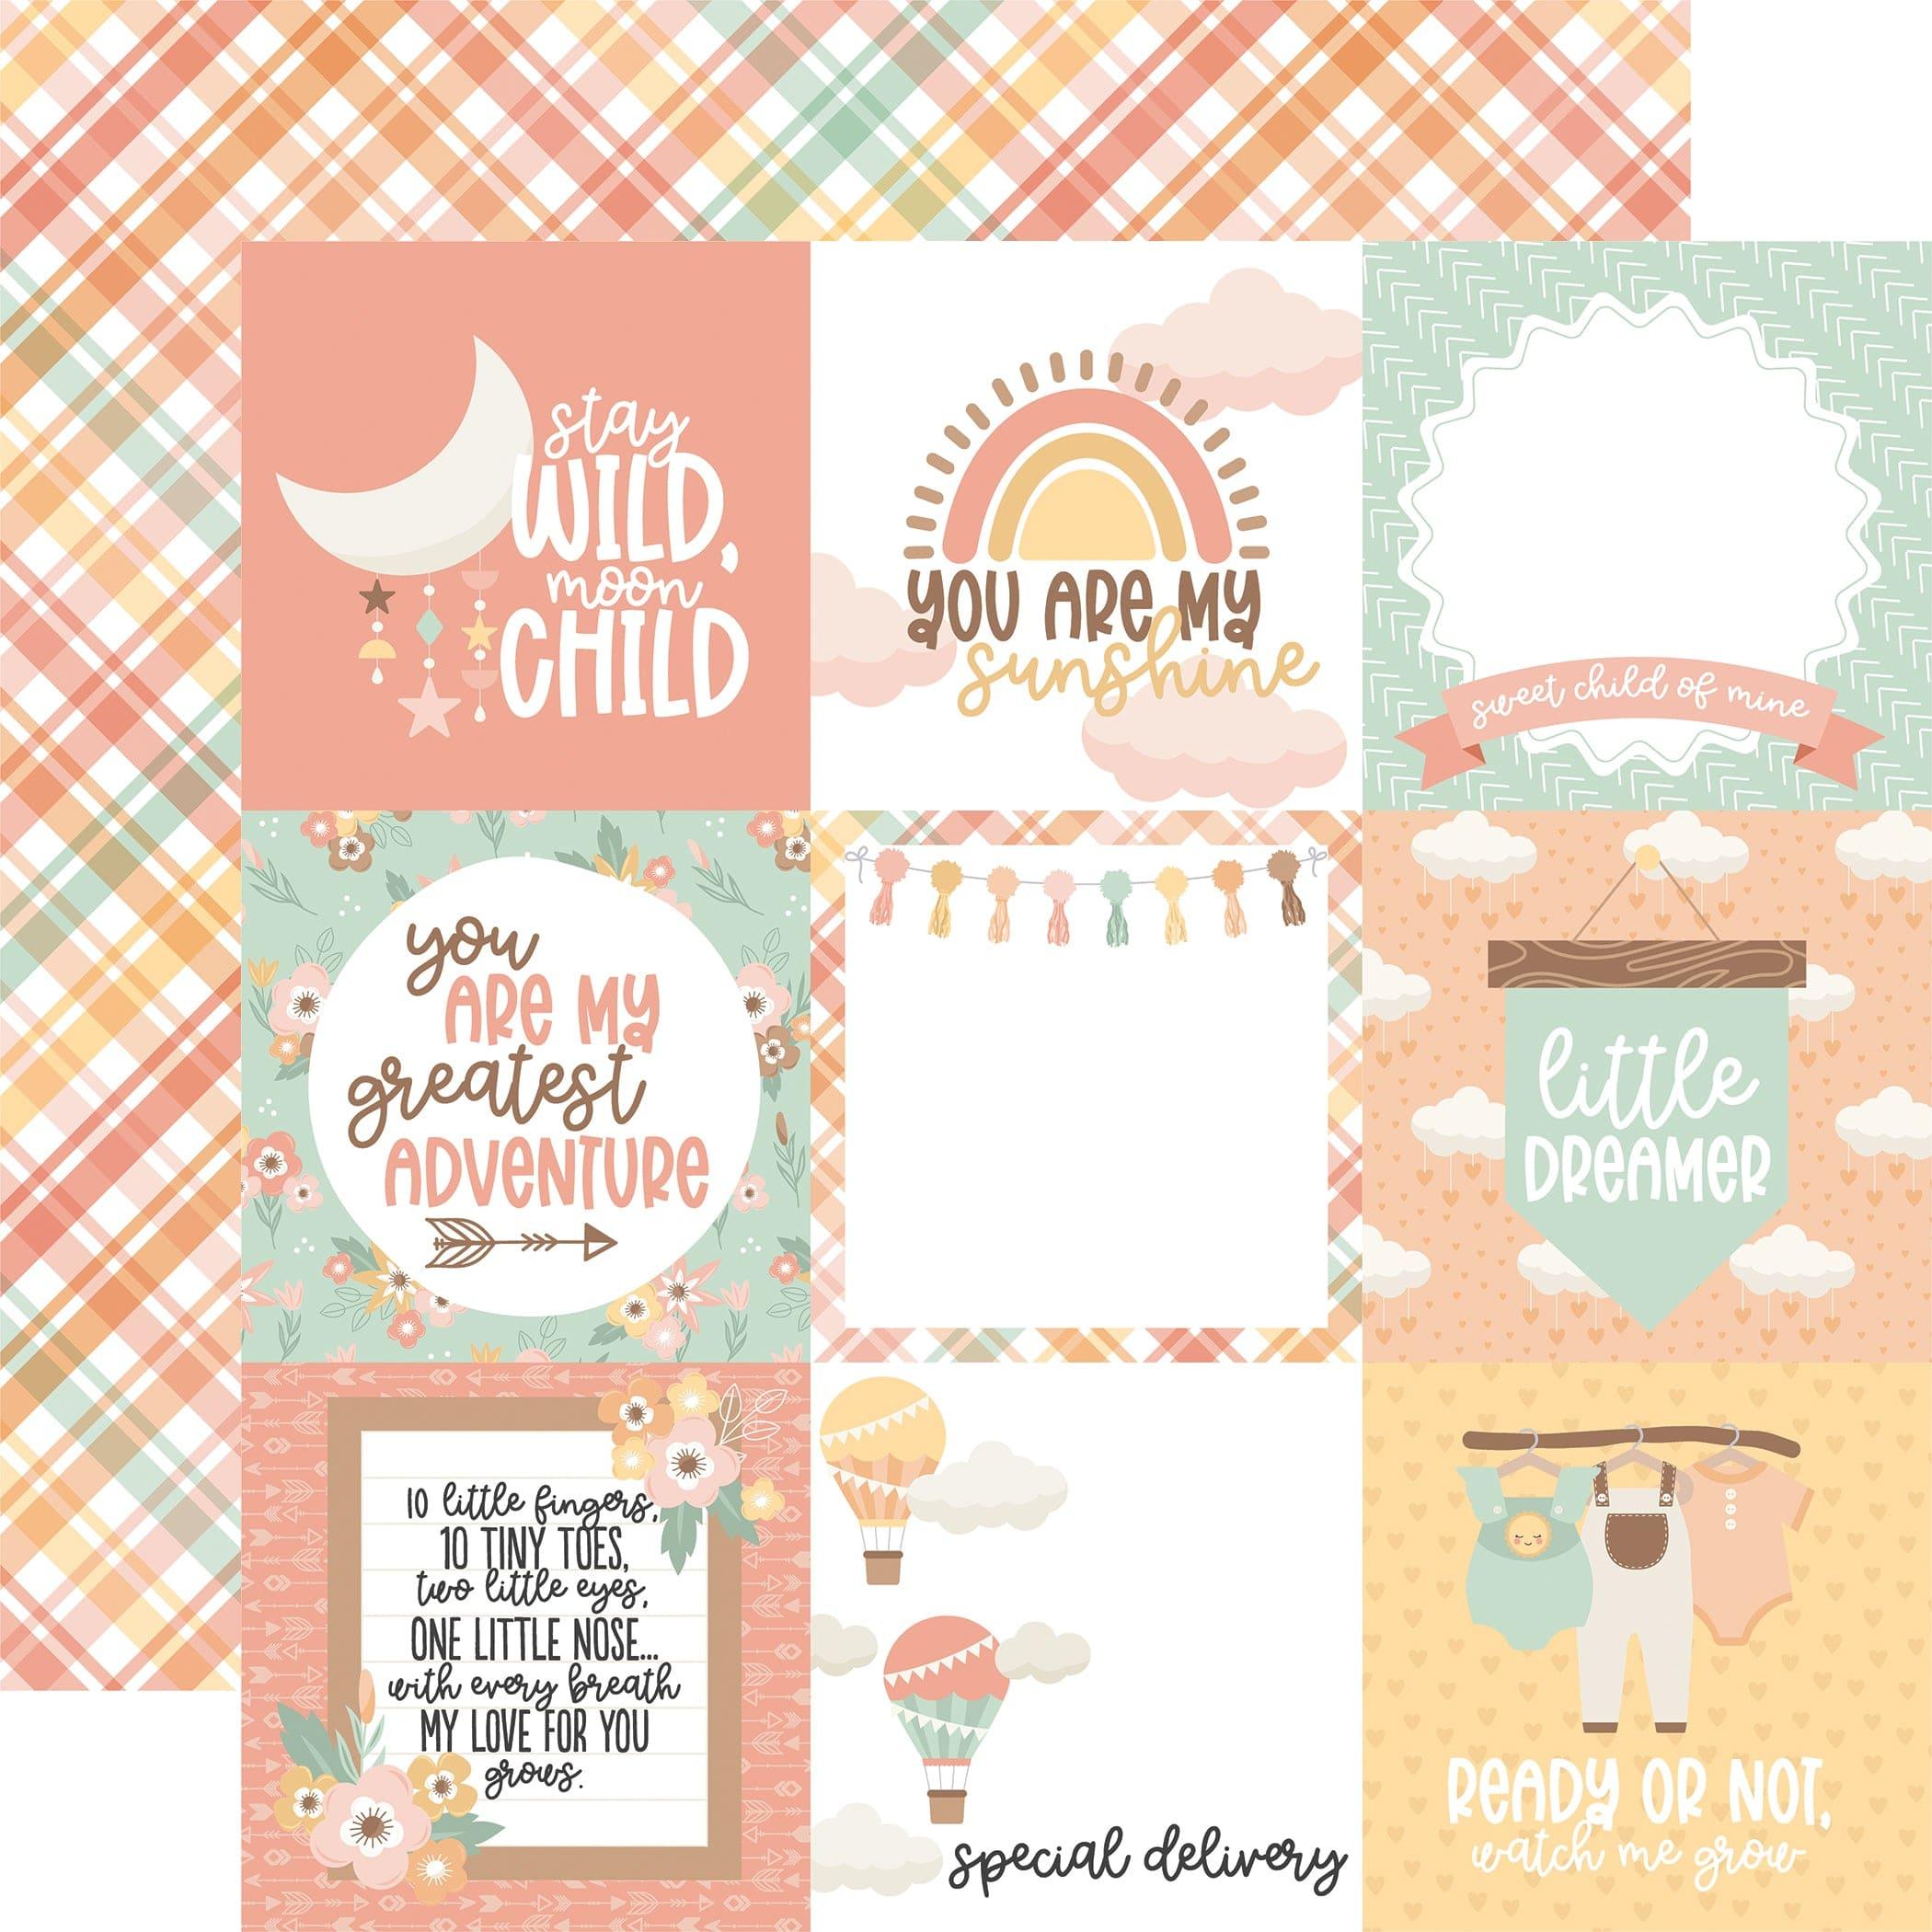 Echo Park Paper Sweet Baby Girl 12x12 Collection – CraftFancy